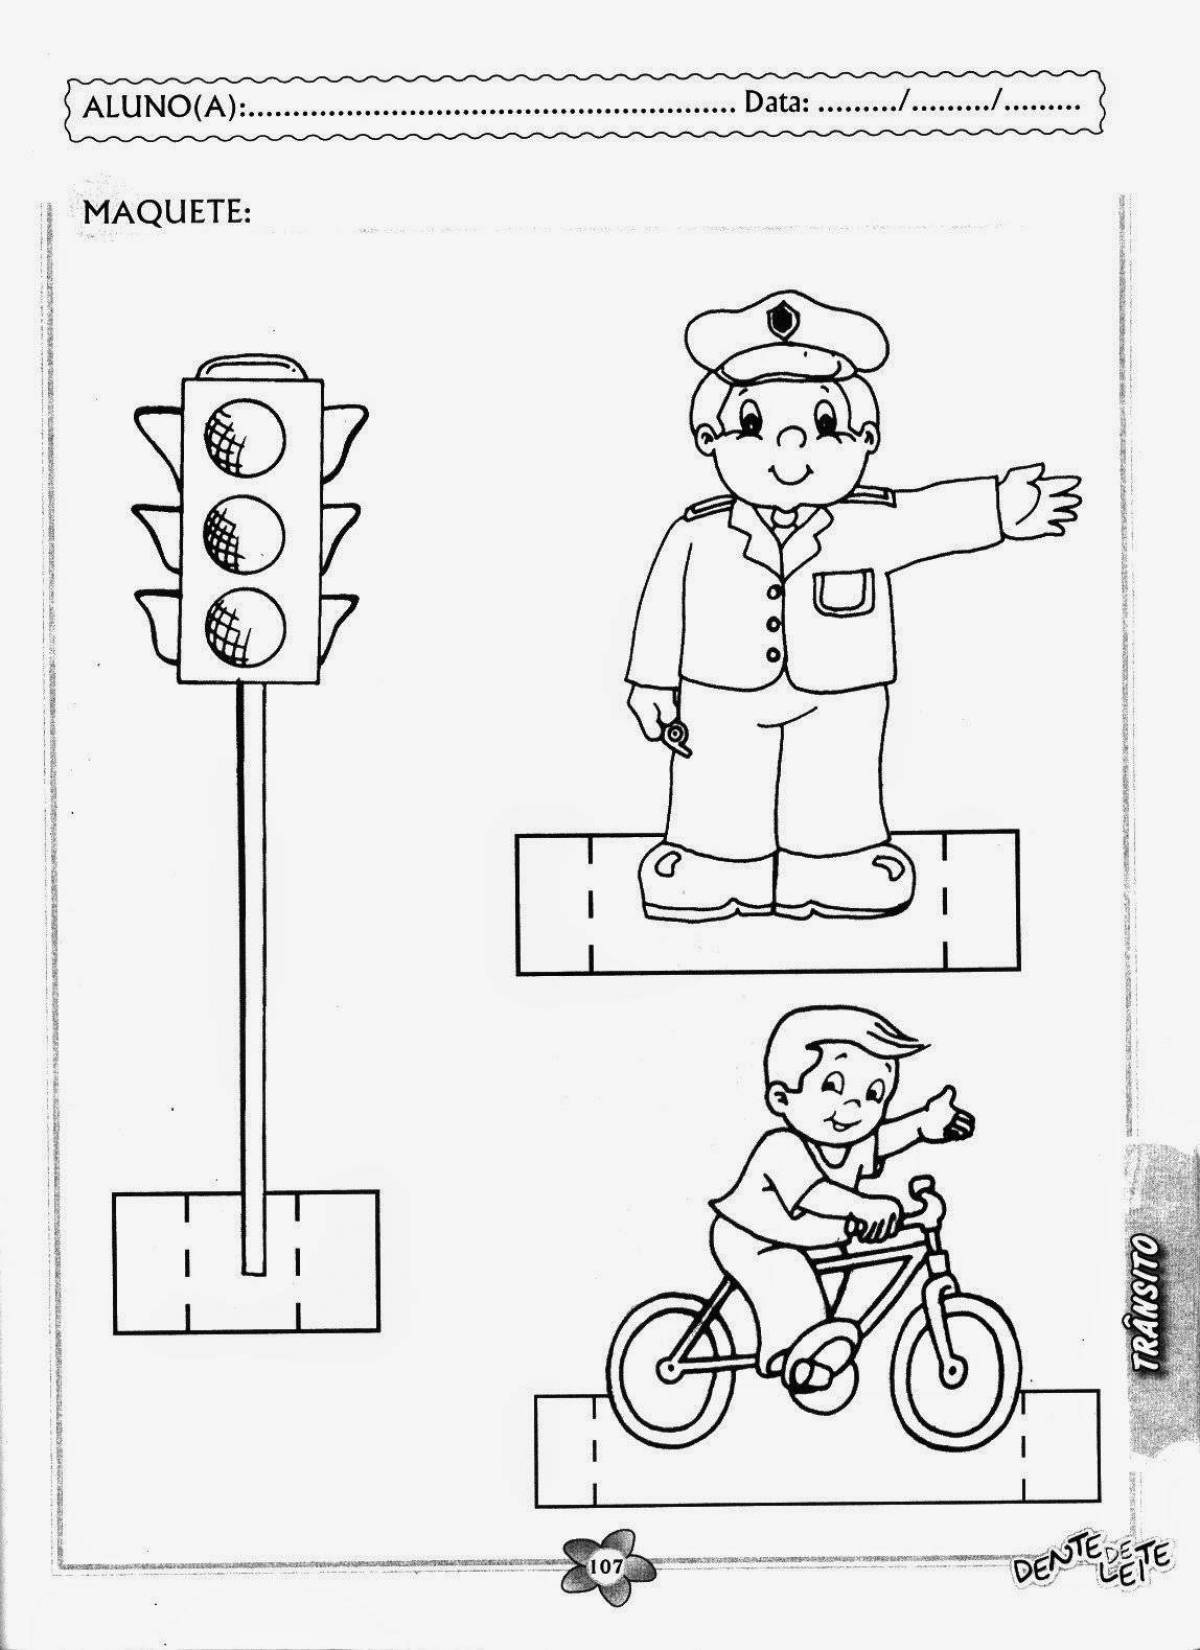 According to traffic rules for preschoolers #6